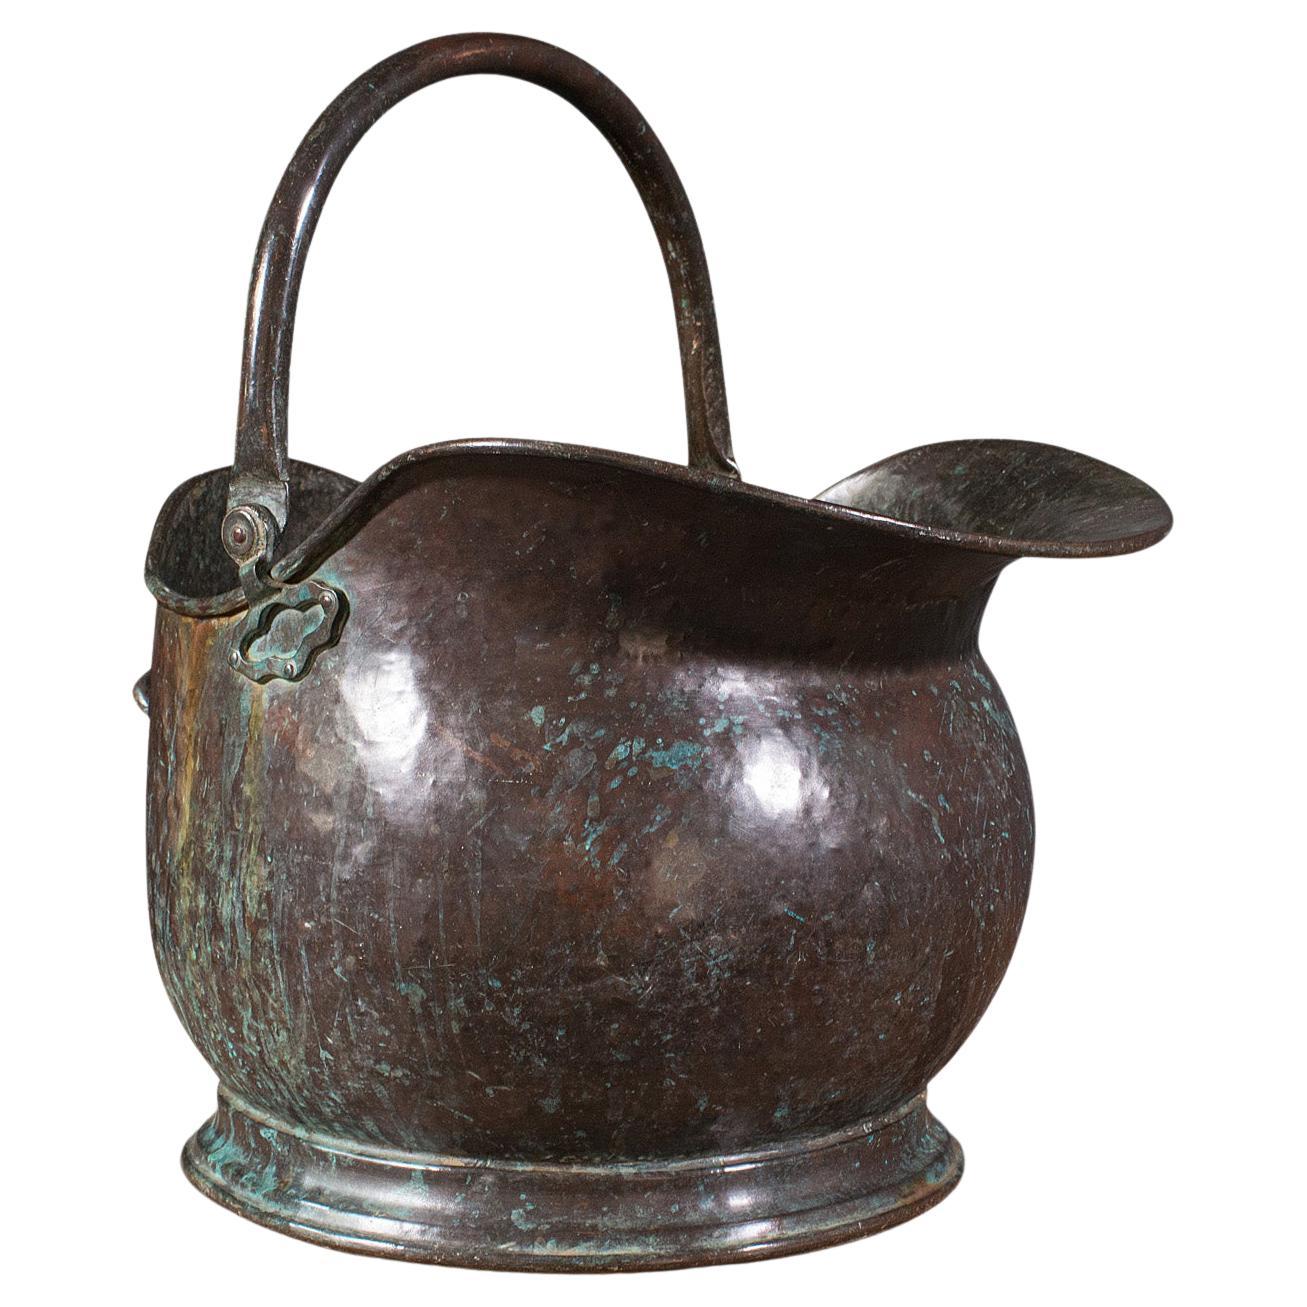 Large Antique Coal Bucket, English, Weathered Copper, Fireside Scuttle, Georgian